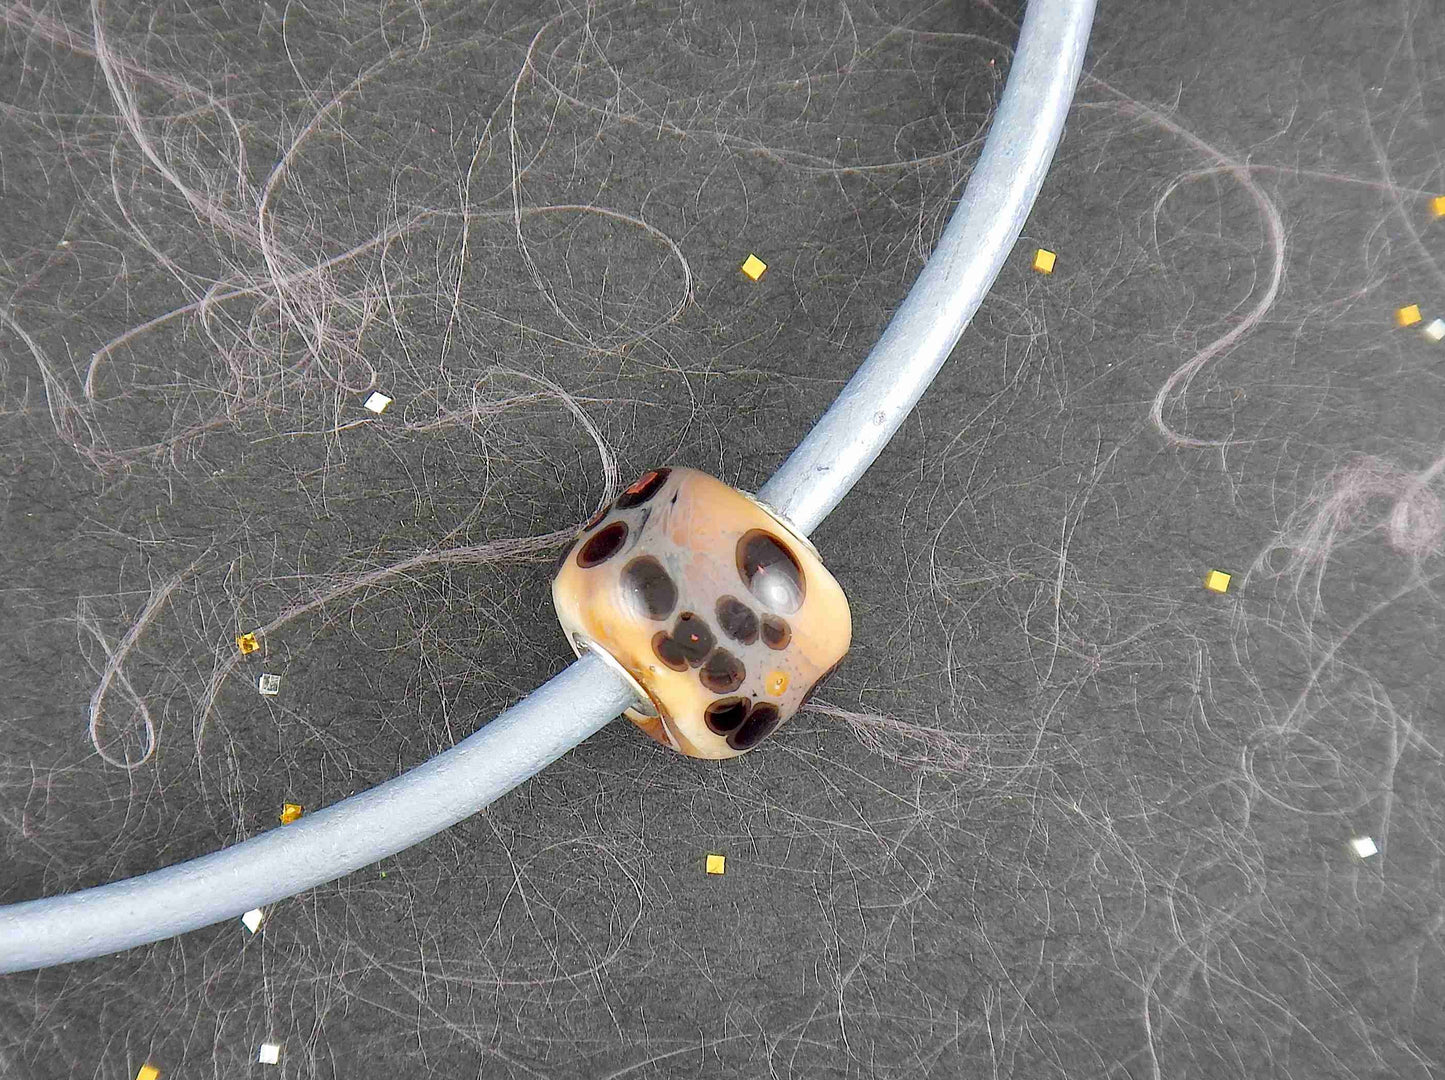 Choker necklace with off-white cylinder glass bead (Murano-style glass handmade in Montreal), black and orange dots, baby blue leather cord, stainless steel clasp